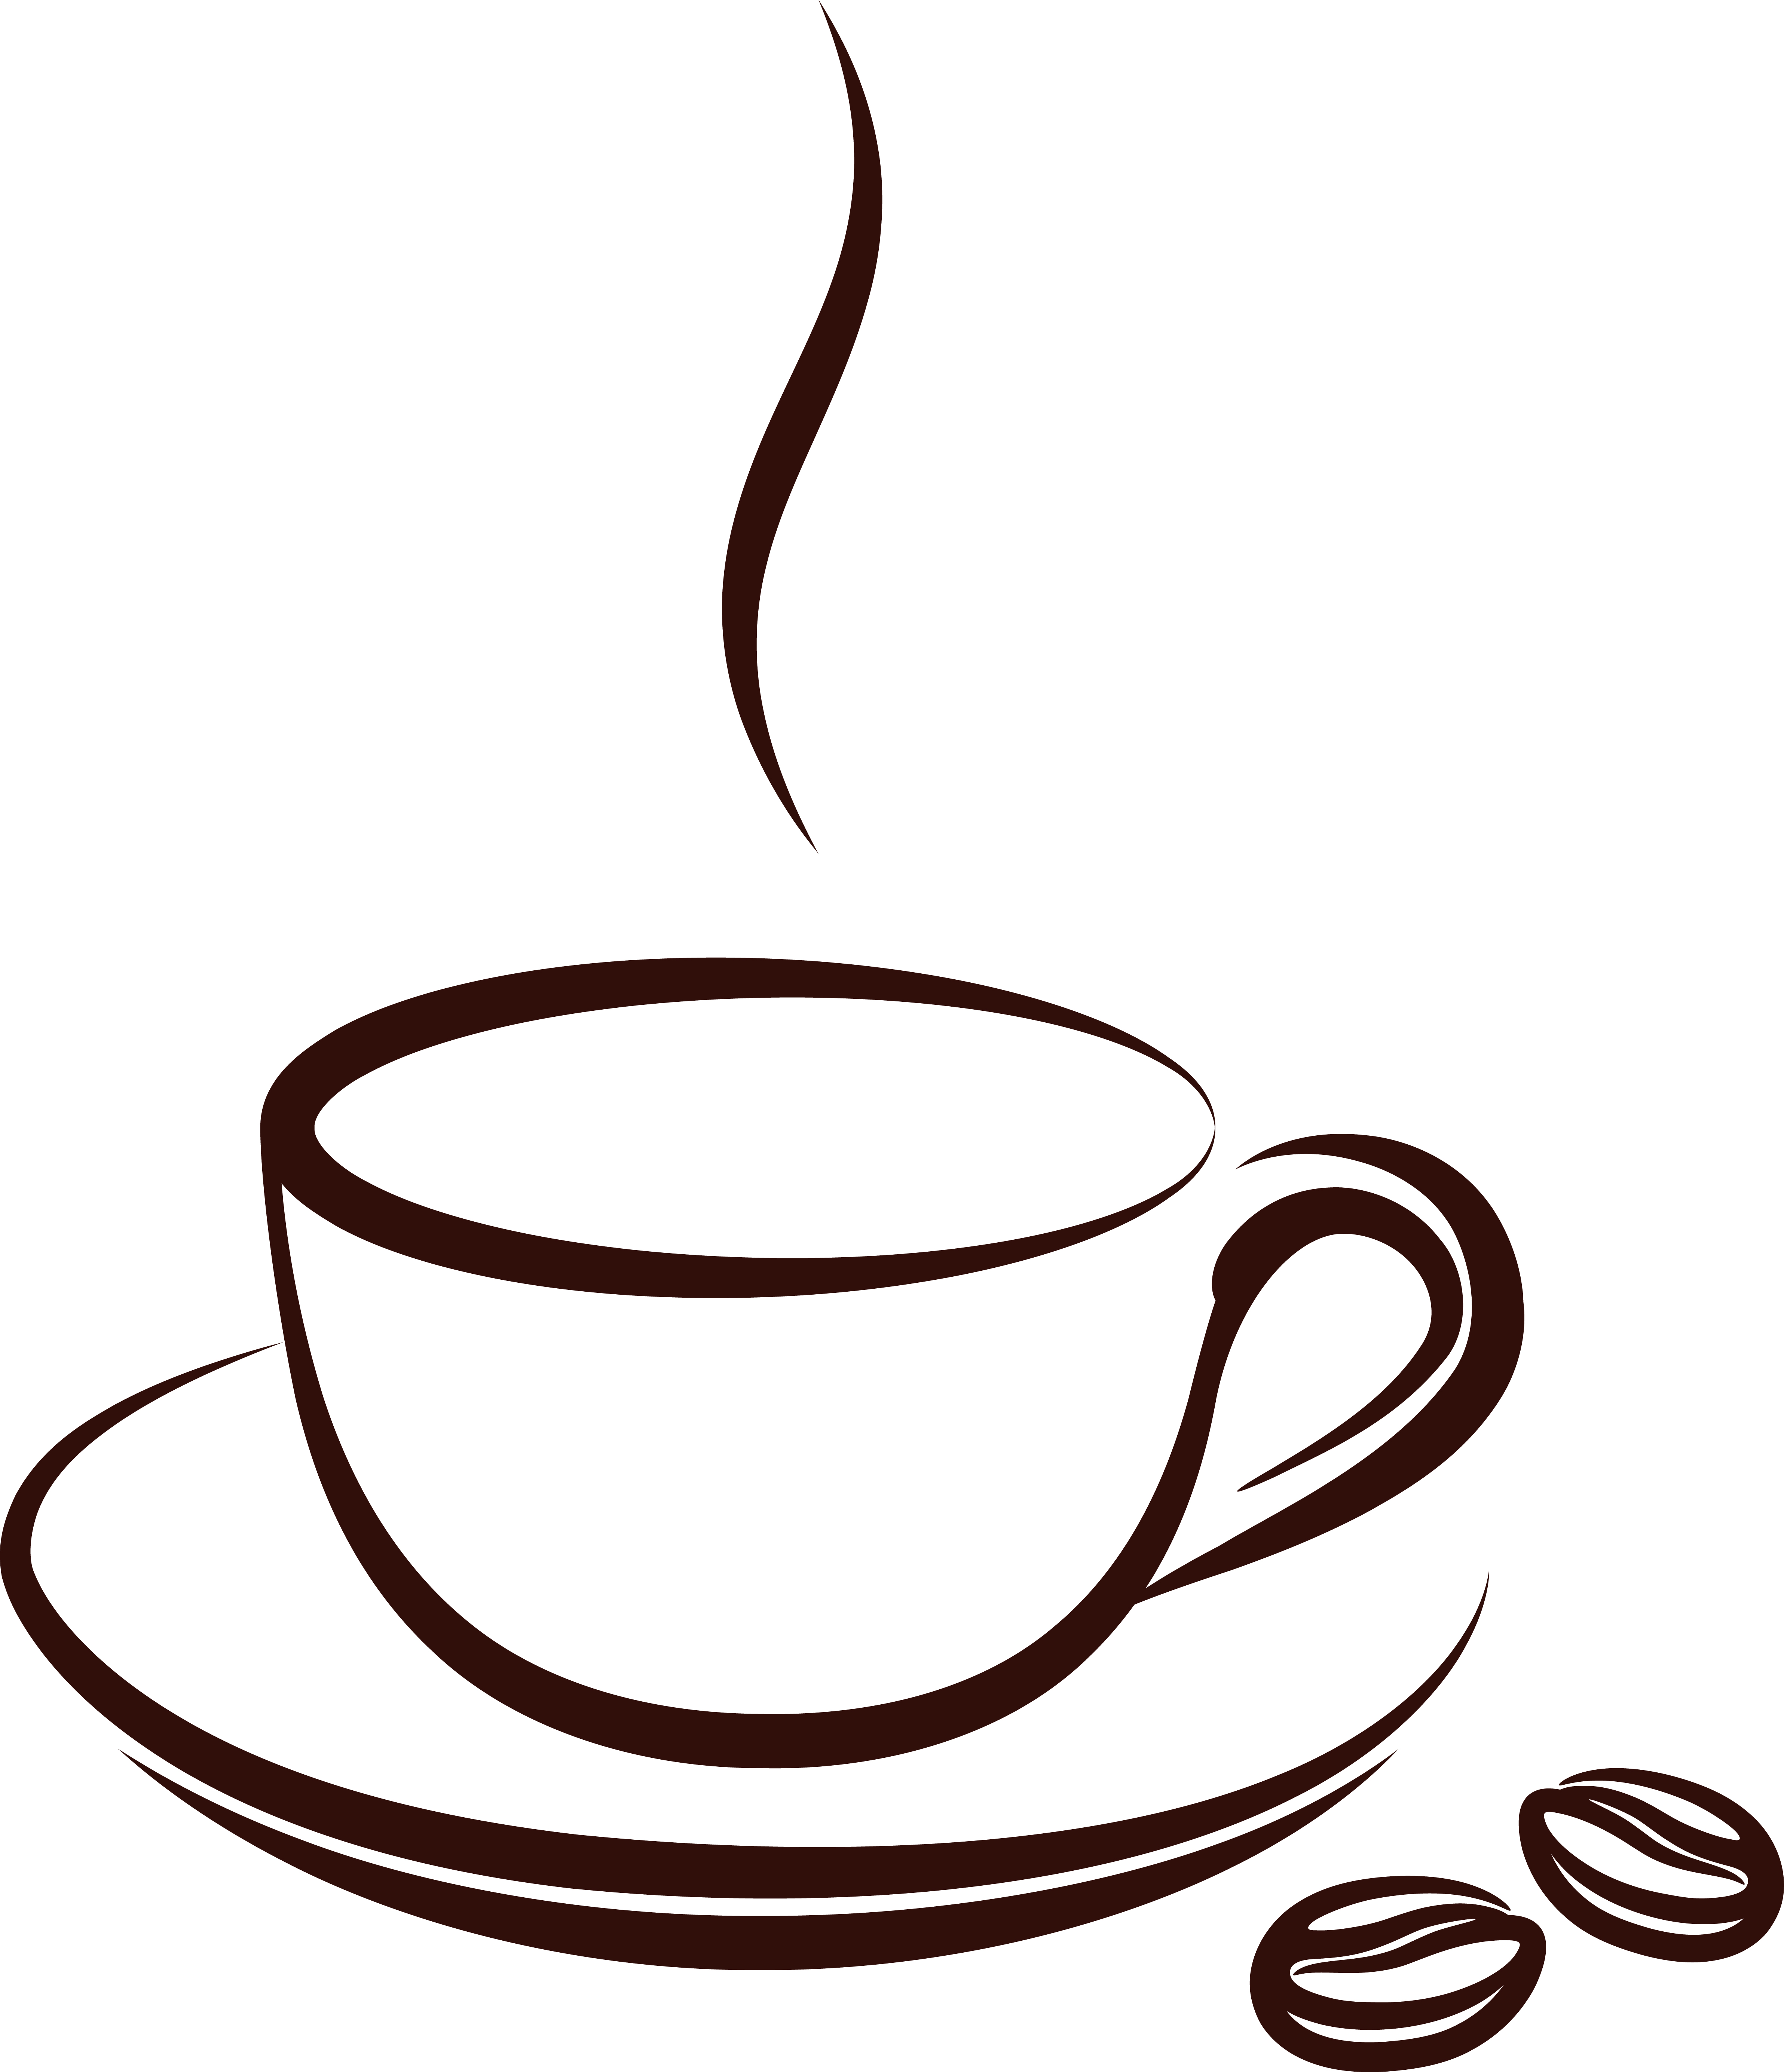 Coffee Cup Vector - Cliparts.co